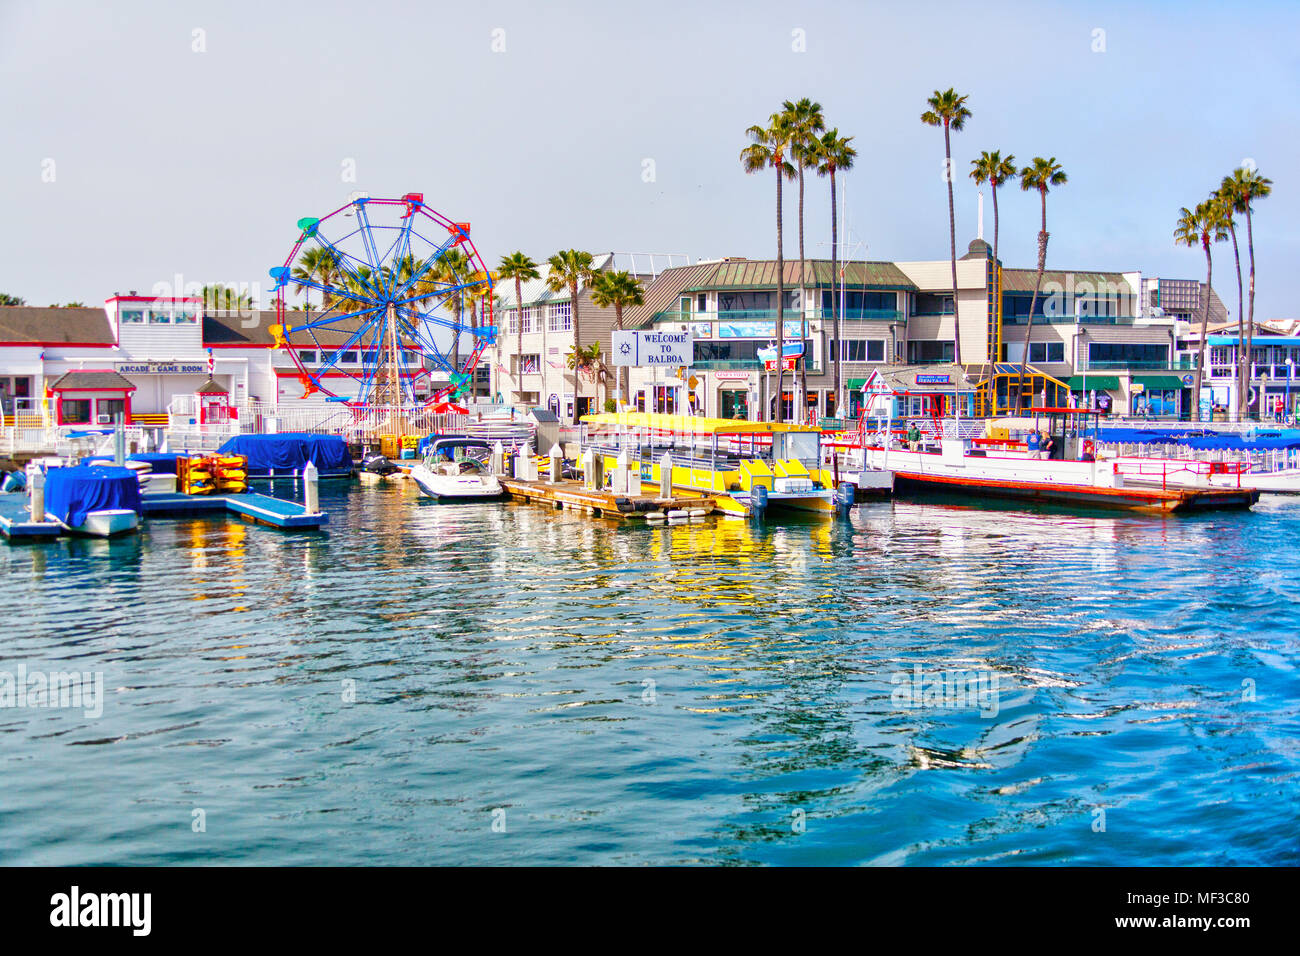 The Grand Canal, On Balboa Island, In Newport Beach, California. Stock  Photo, Picture and Royalty Free Image. Image 37342377.